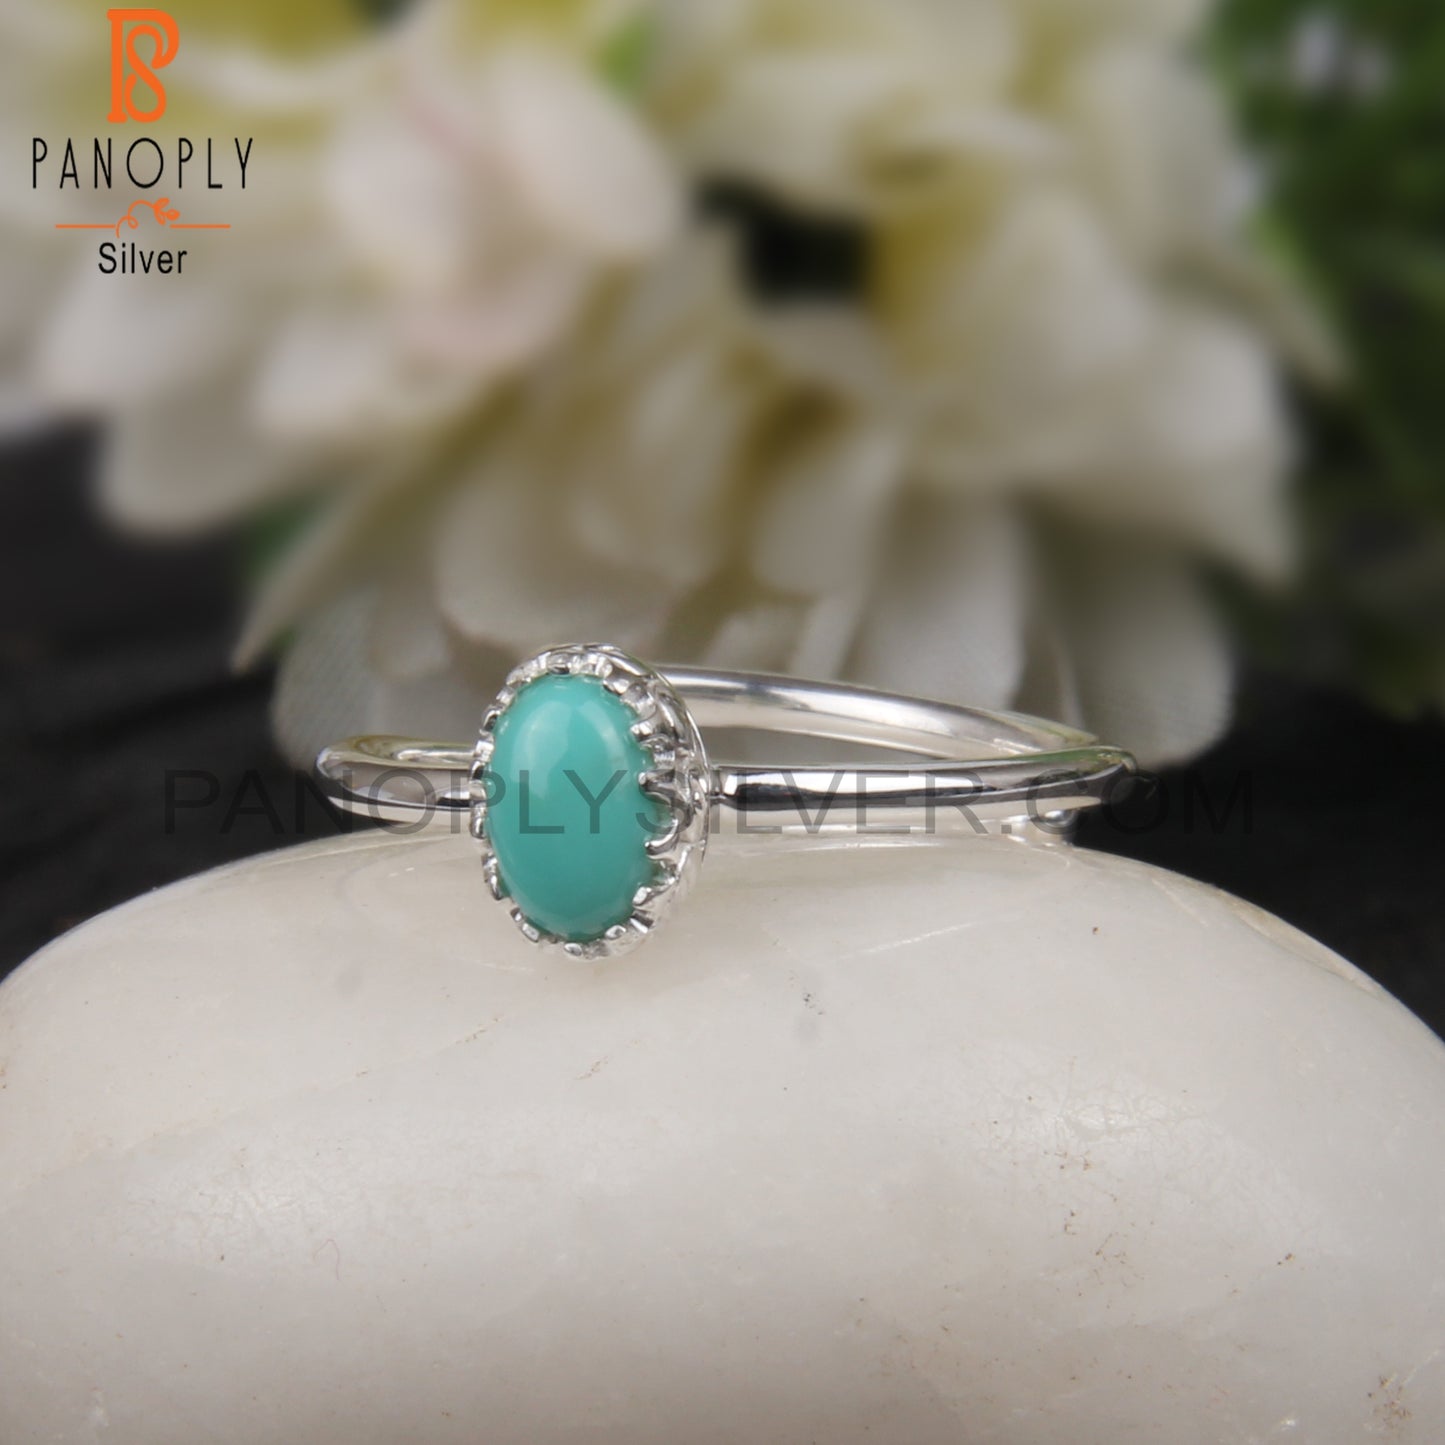 Arizona Turquoise Oval 925 Silver Sky Blue Ring